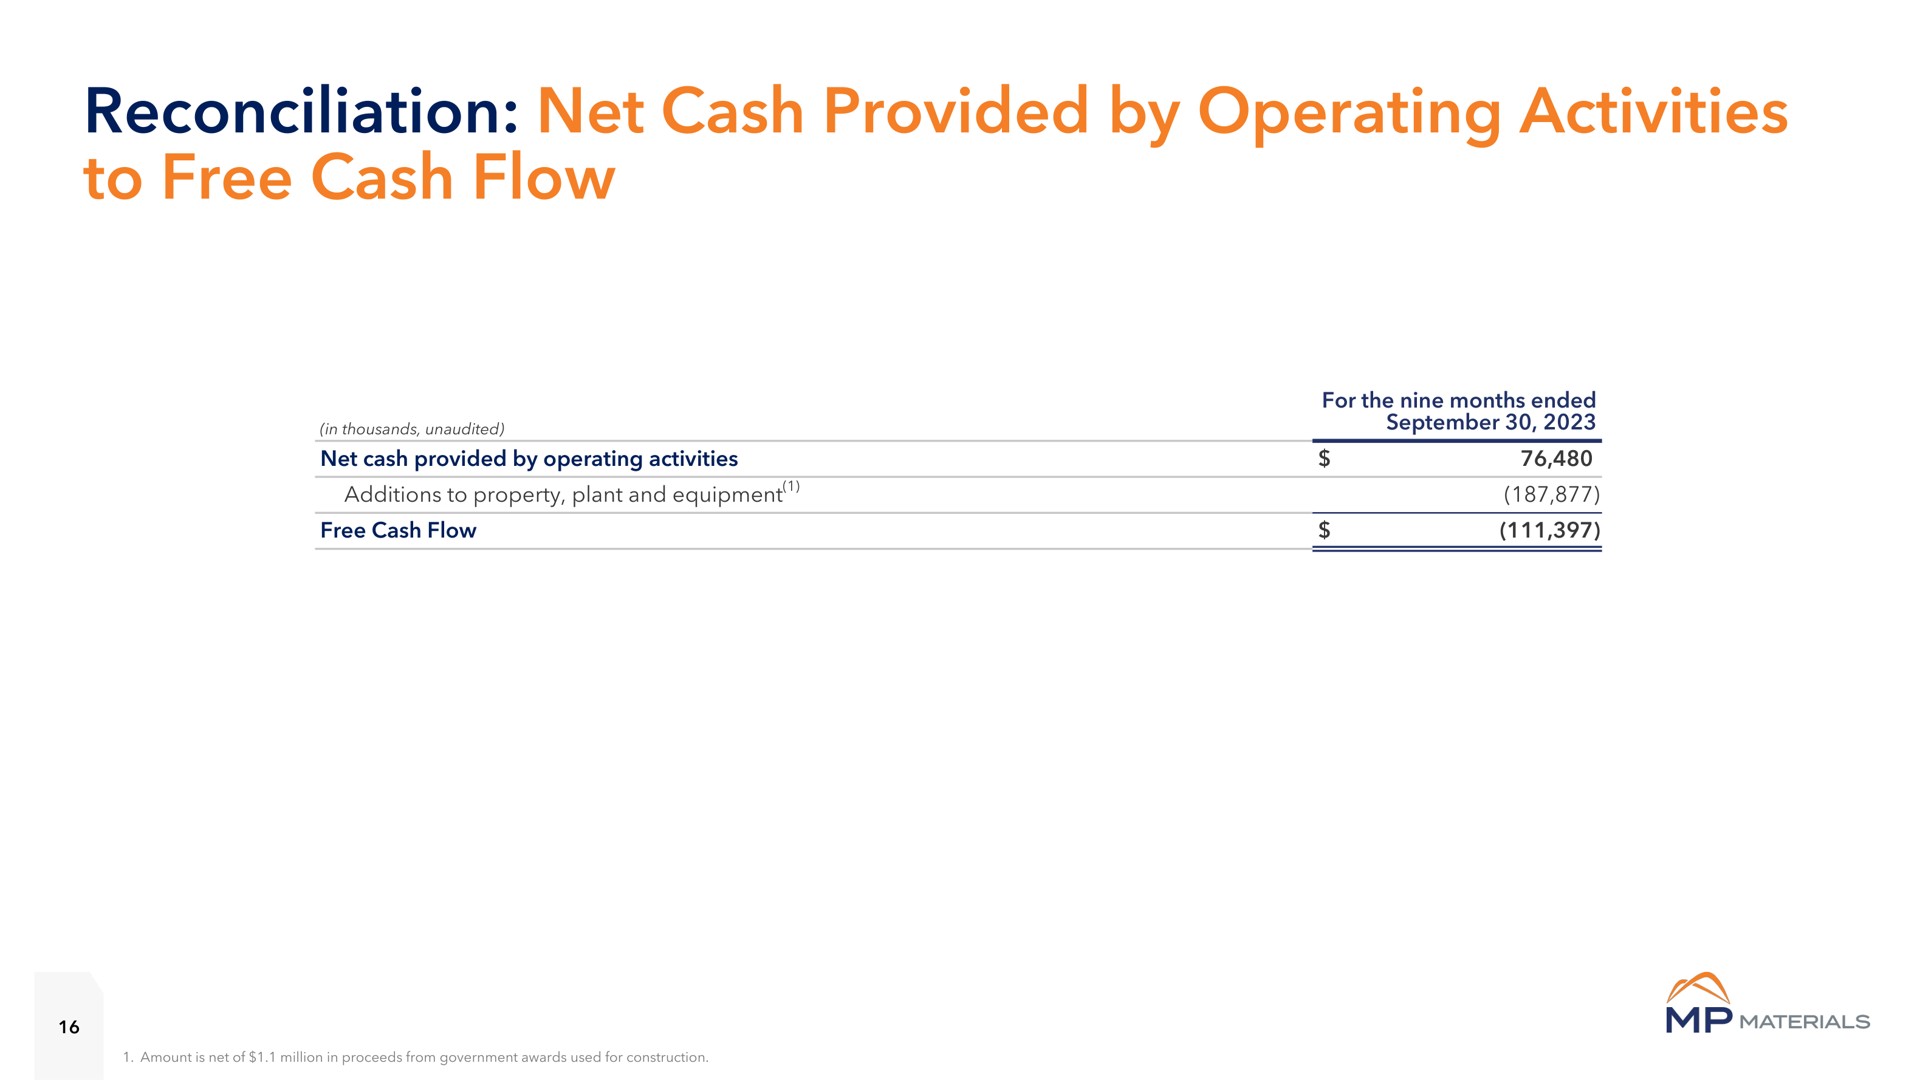 reconciliation net cash provided by operating activities to free cash flow | MP Materials